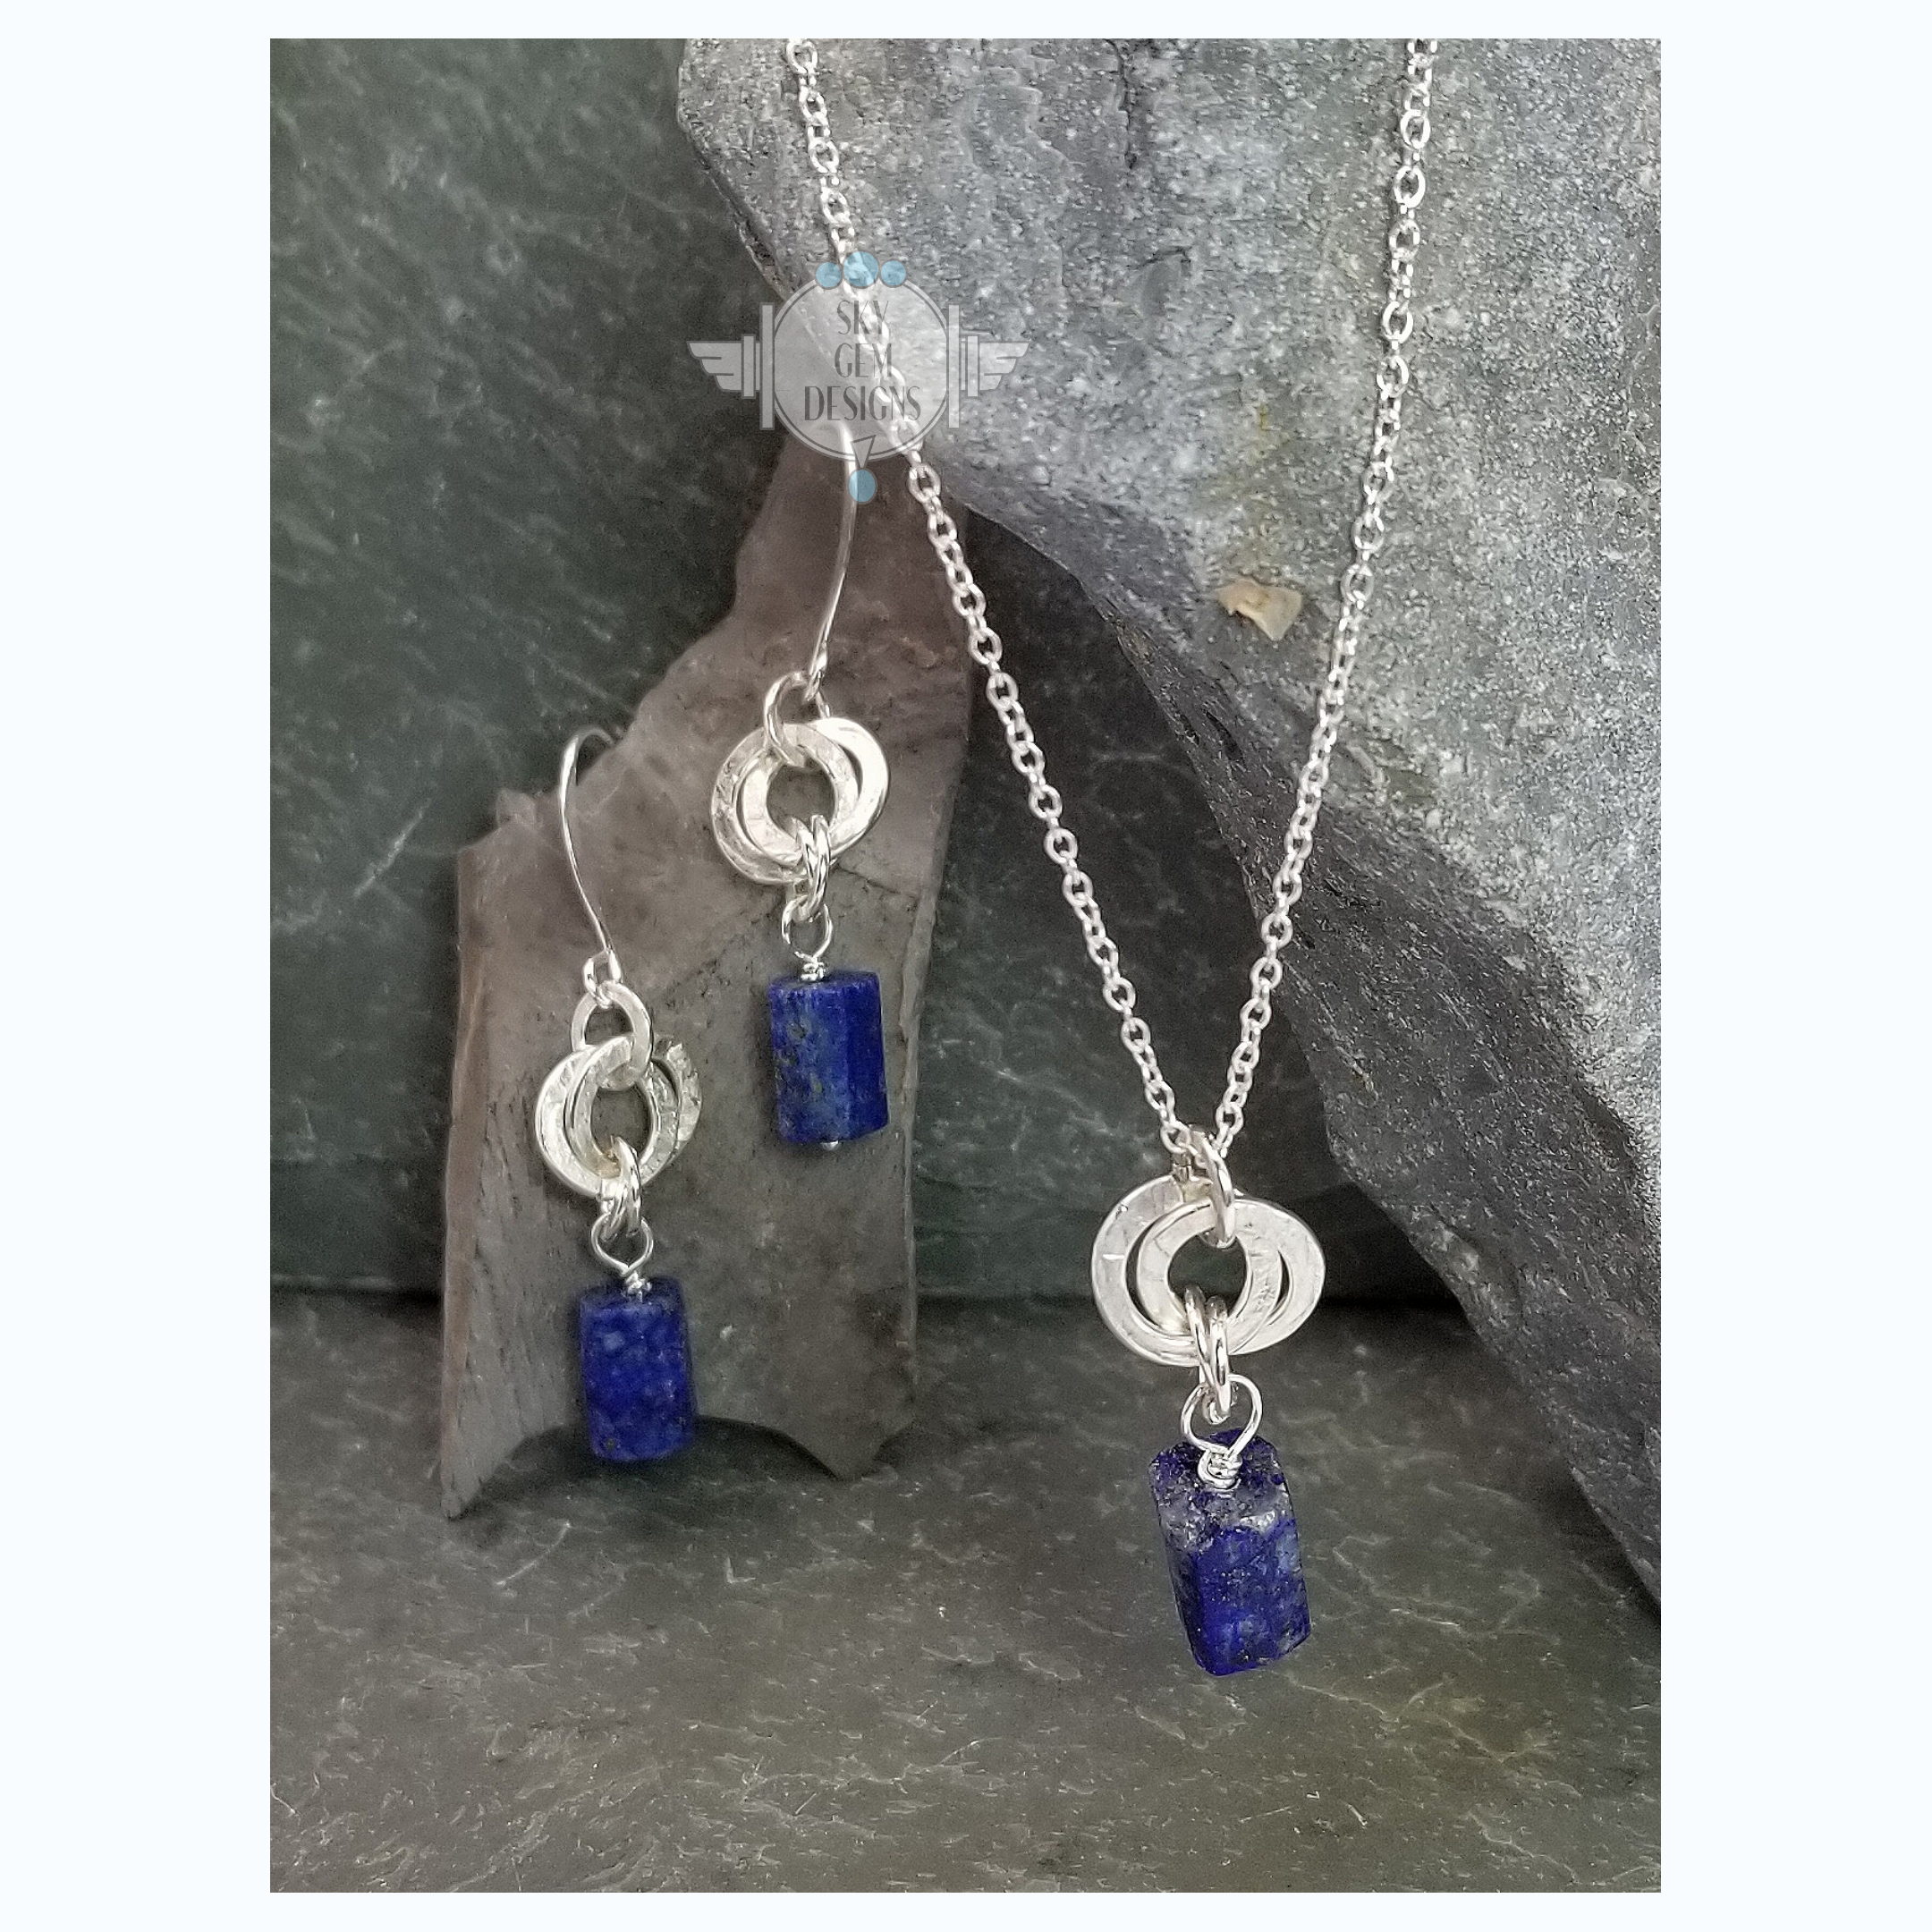 ENDLESS CIRCLE HAMMERED RINGS EARRINGS WITH LAPIS LAZULI